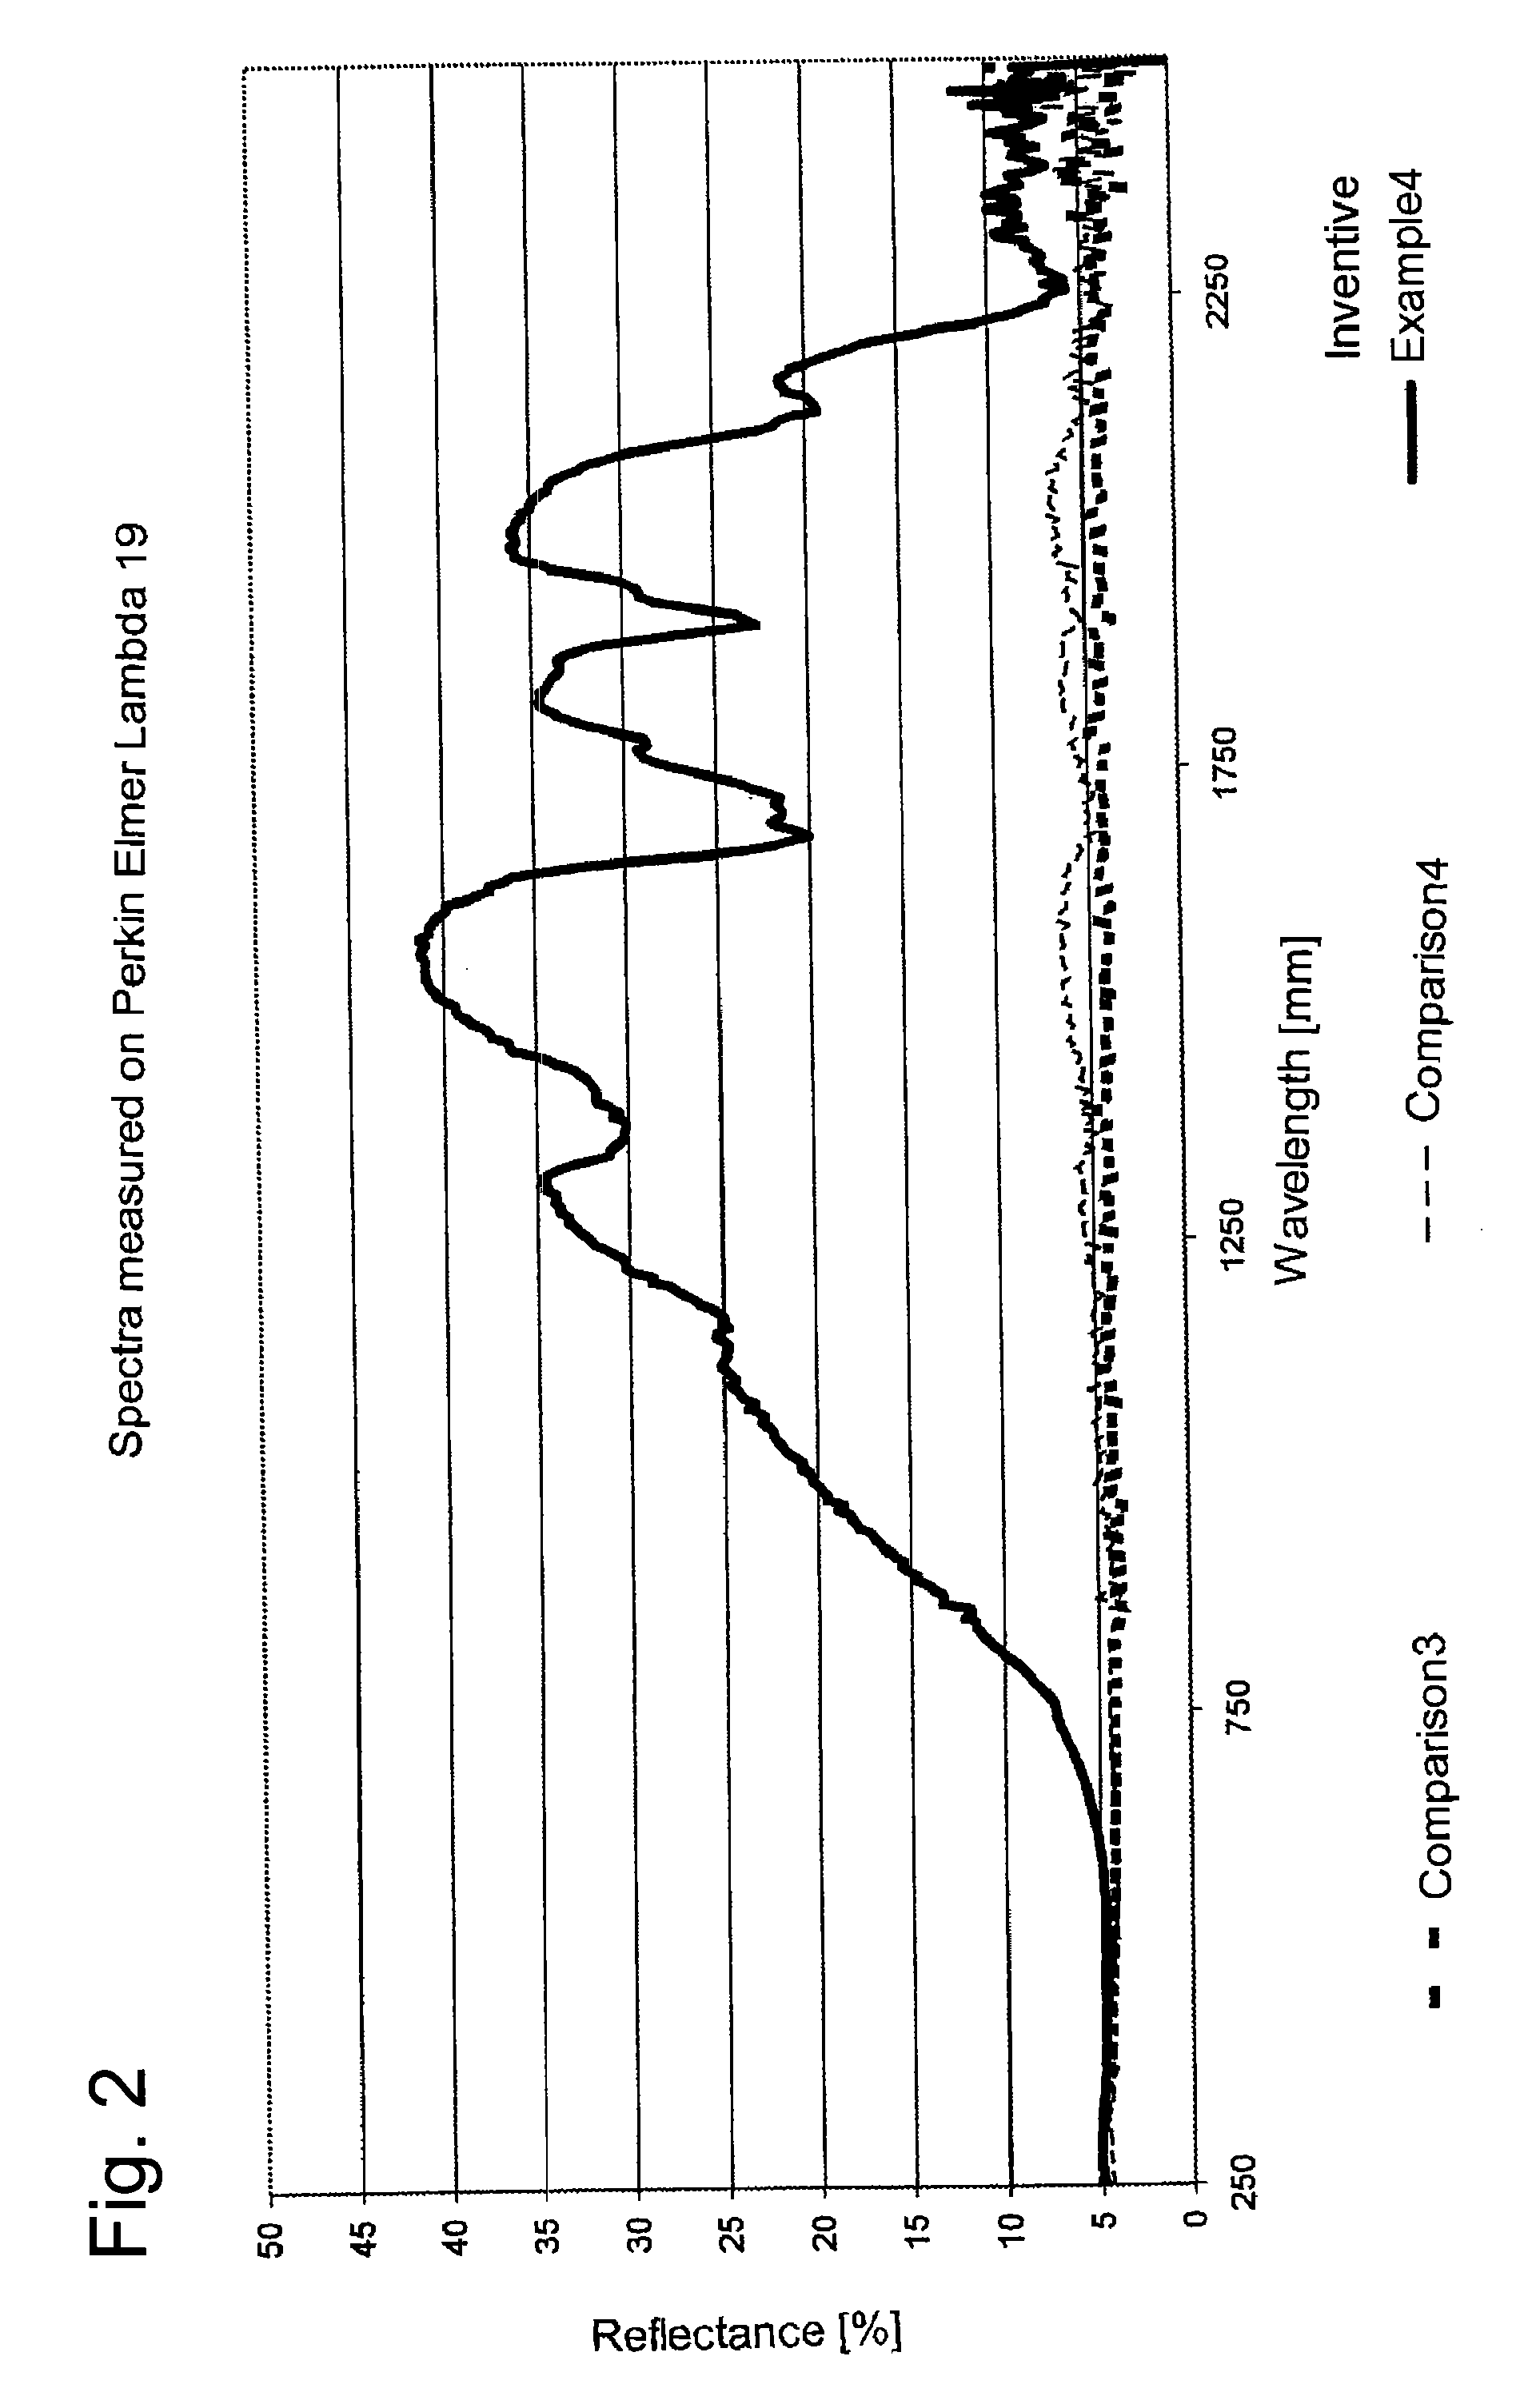 Opaquely colored, infra-red plastics molding composition and methods of making the opaquely colored, infra-red plastics molding compostion